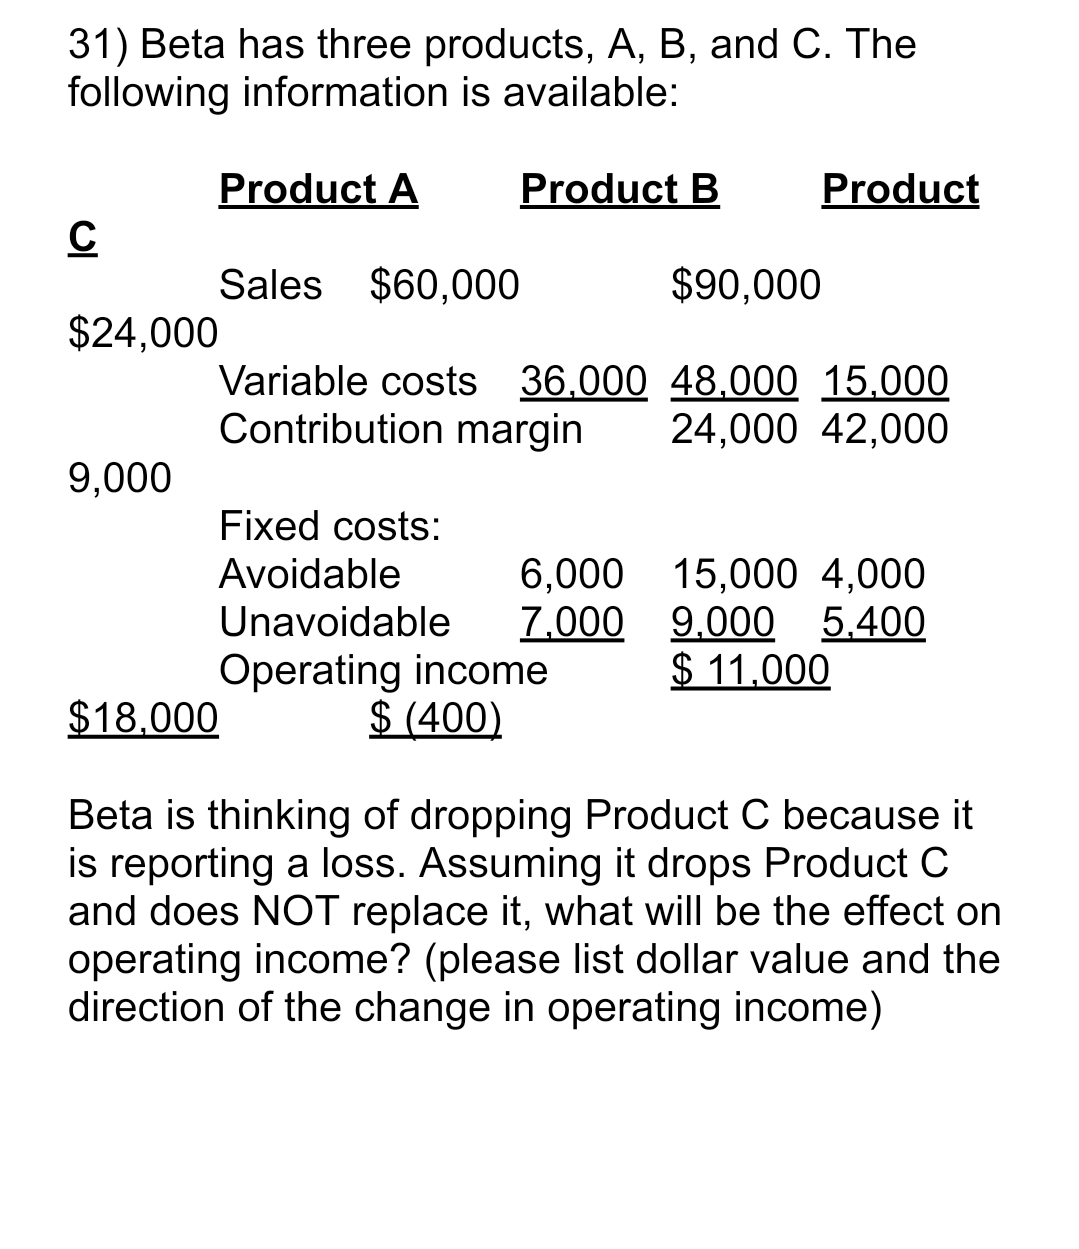 31) Beta has three products, A, B, and C. The
following information is available:
C
$24,000
9,000
Product A
Product B
$18,000
$90,000
Variable costs 36,000 48,000 15,000
Contribution margin 24,000 42,000
Sales $60,000
Fixed costs:
Avoidable
6,000
Unavoidable 7,000
Product
Operating income
$ (400)
15,000 4,000
9,000 5.400
$ 11,000
Beta is thinking of dropping Product C because it
is reporting a loss. Assuming it drops Product C
and does NOT replace it, what will be the effect on
operating income? (please list dollar value and the
direction of the change in operating income)